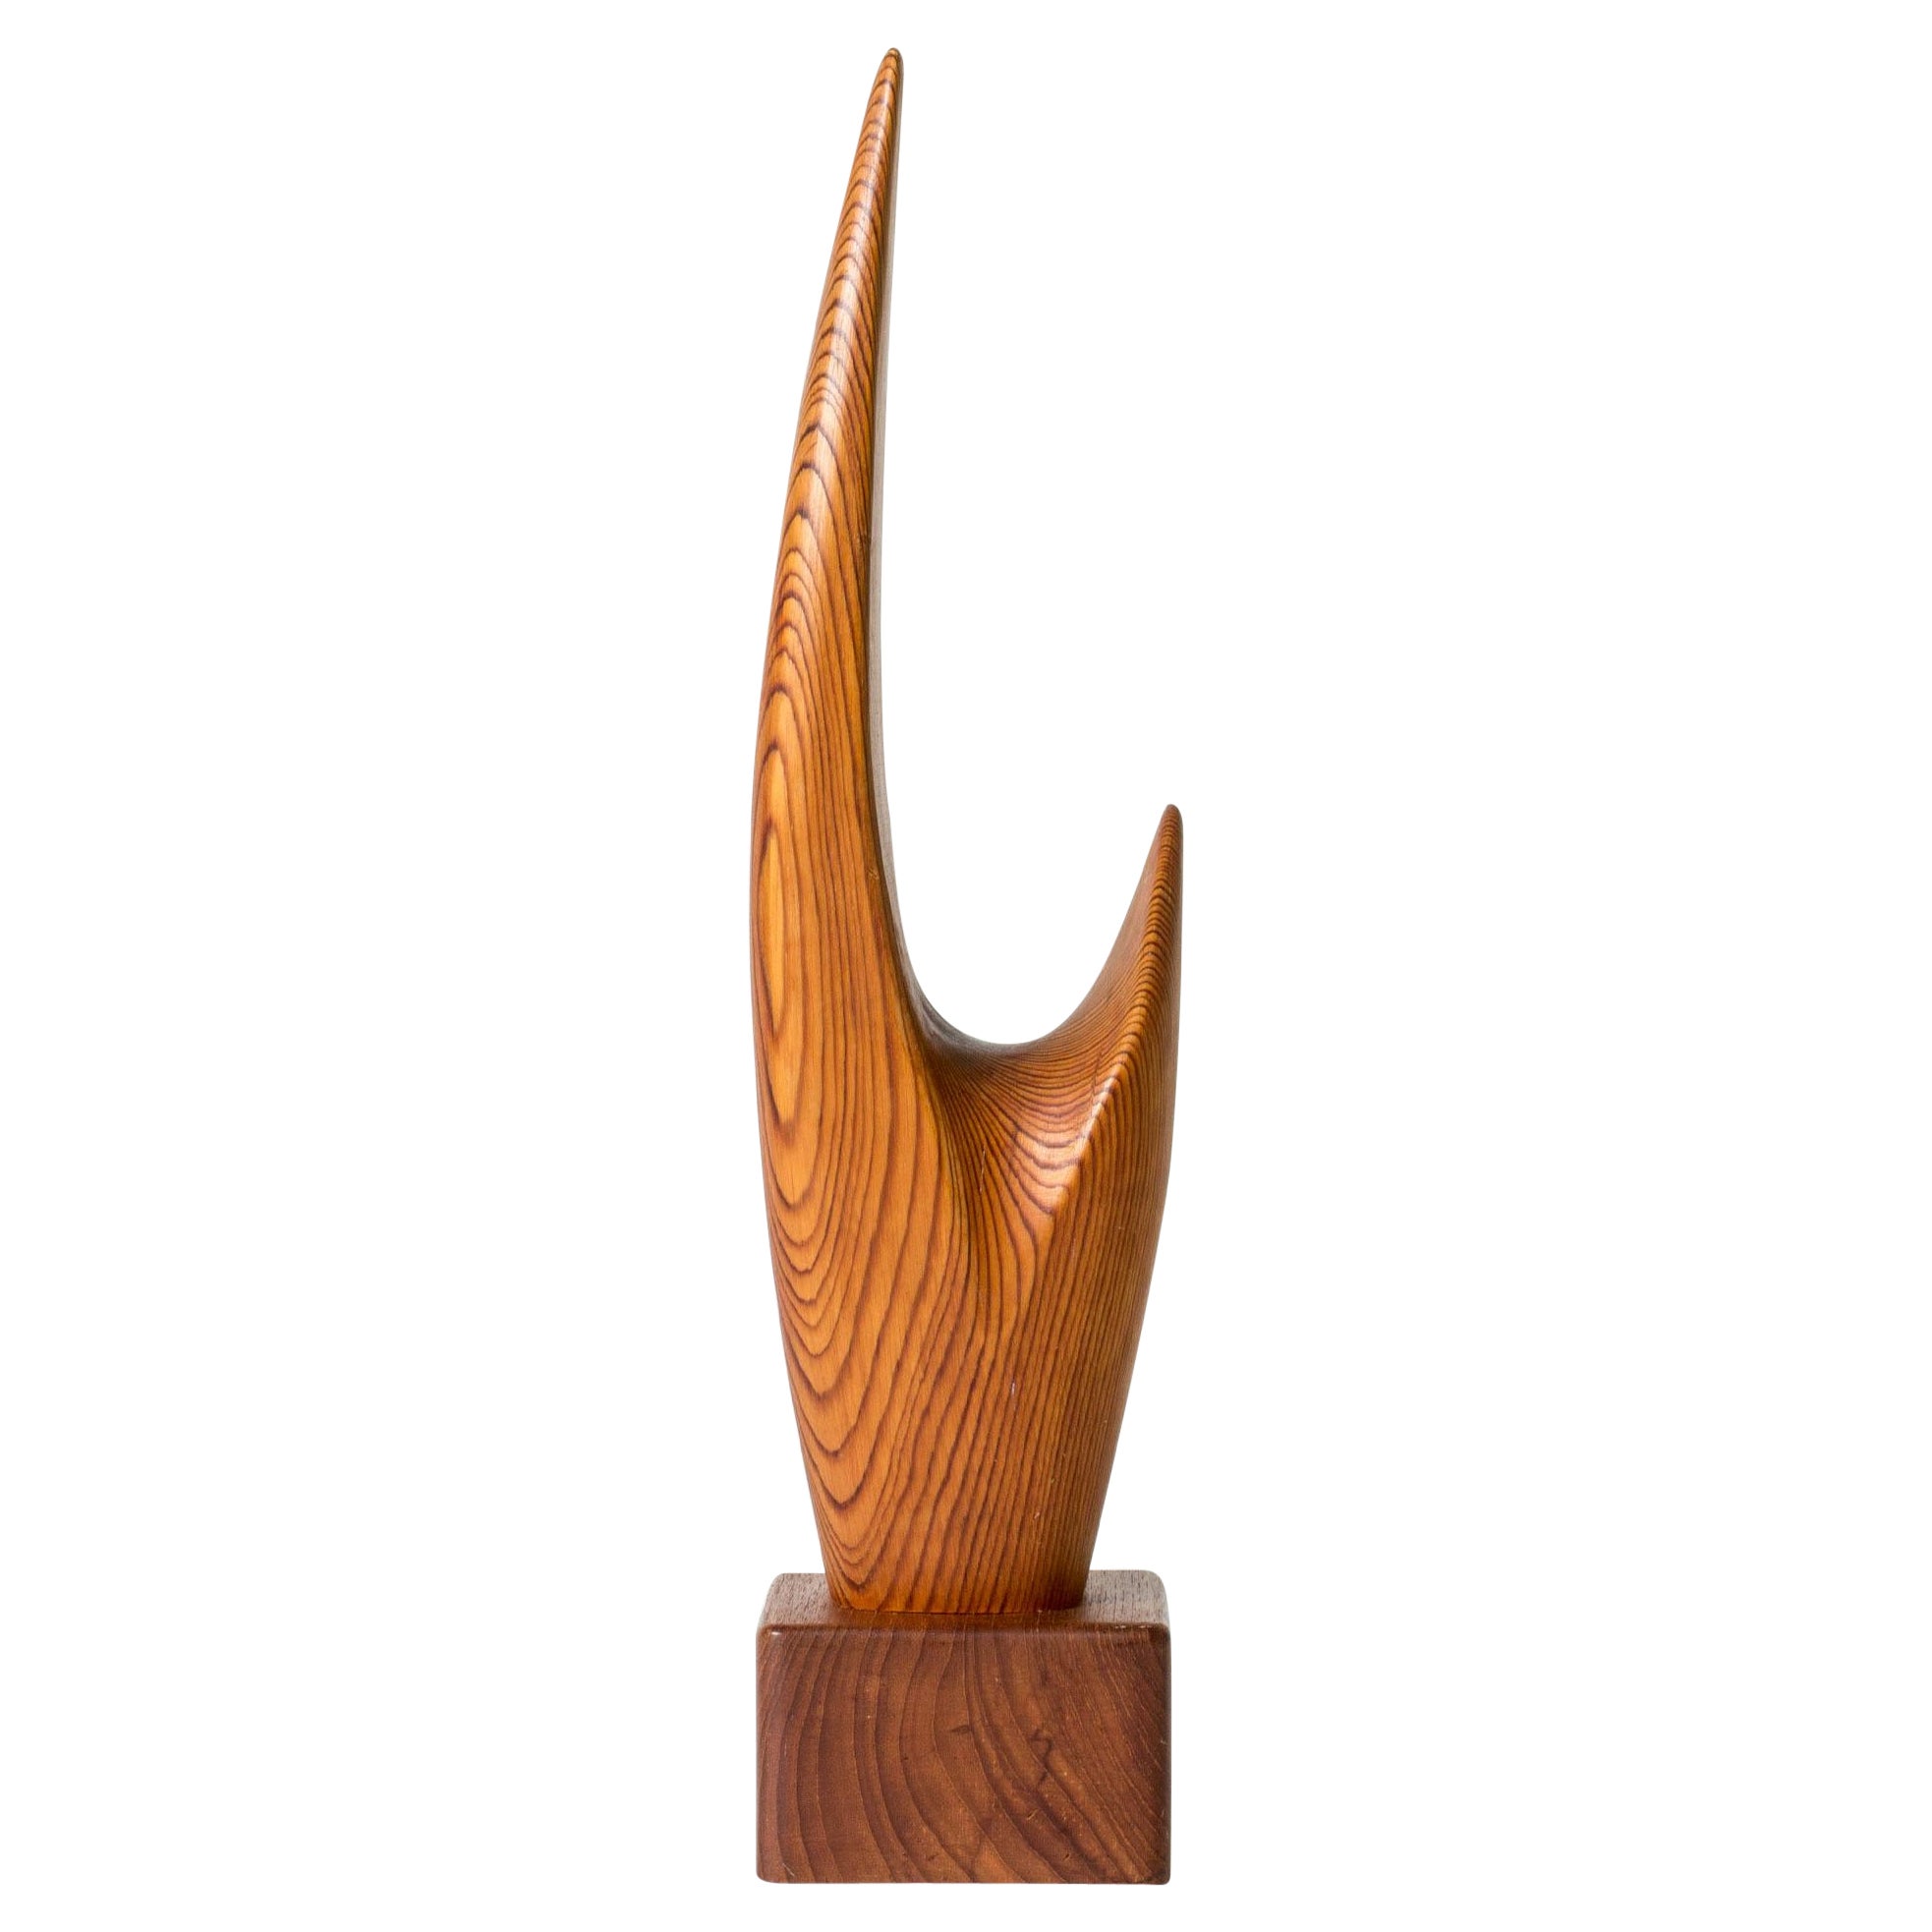 Midcentury Wooden Abstract Sculpture by Johnny Mattsson, Sweden, 1962 For Sale